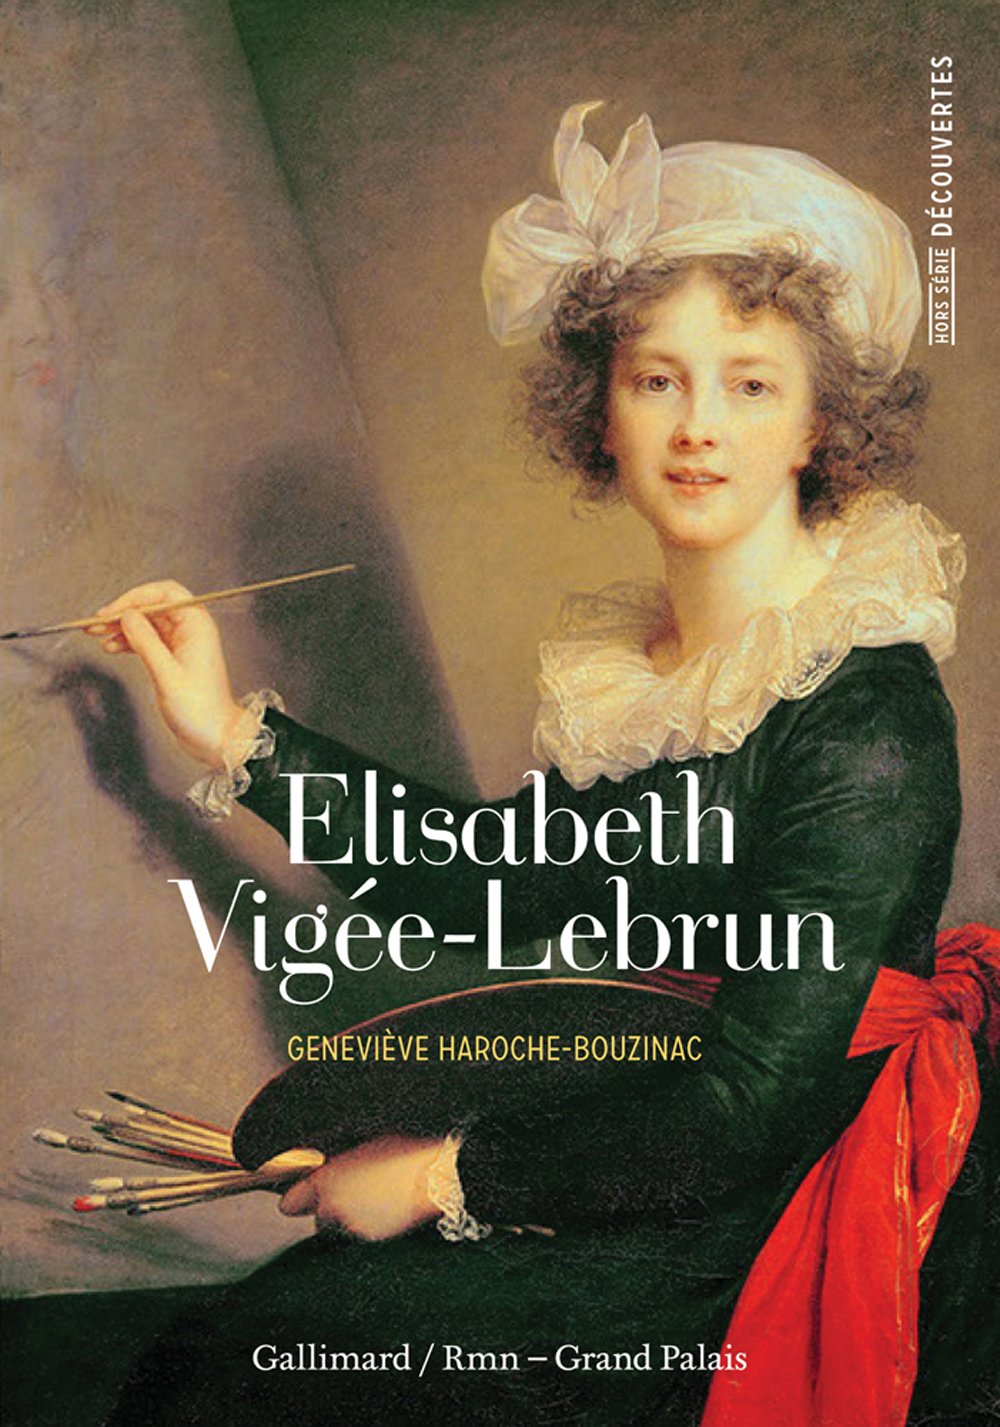 Memoirs of Madame Vigée Lebrun translated by Lionel Strachey